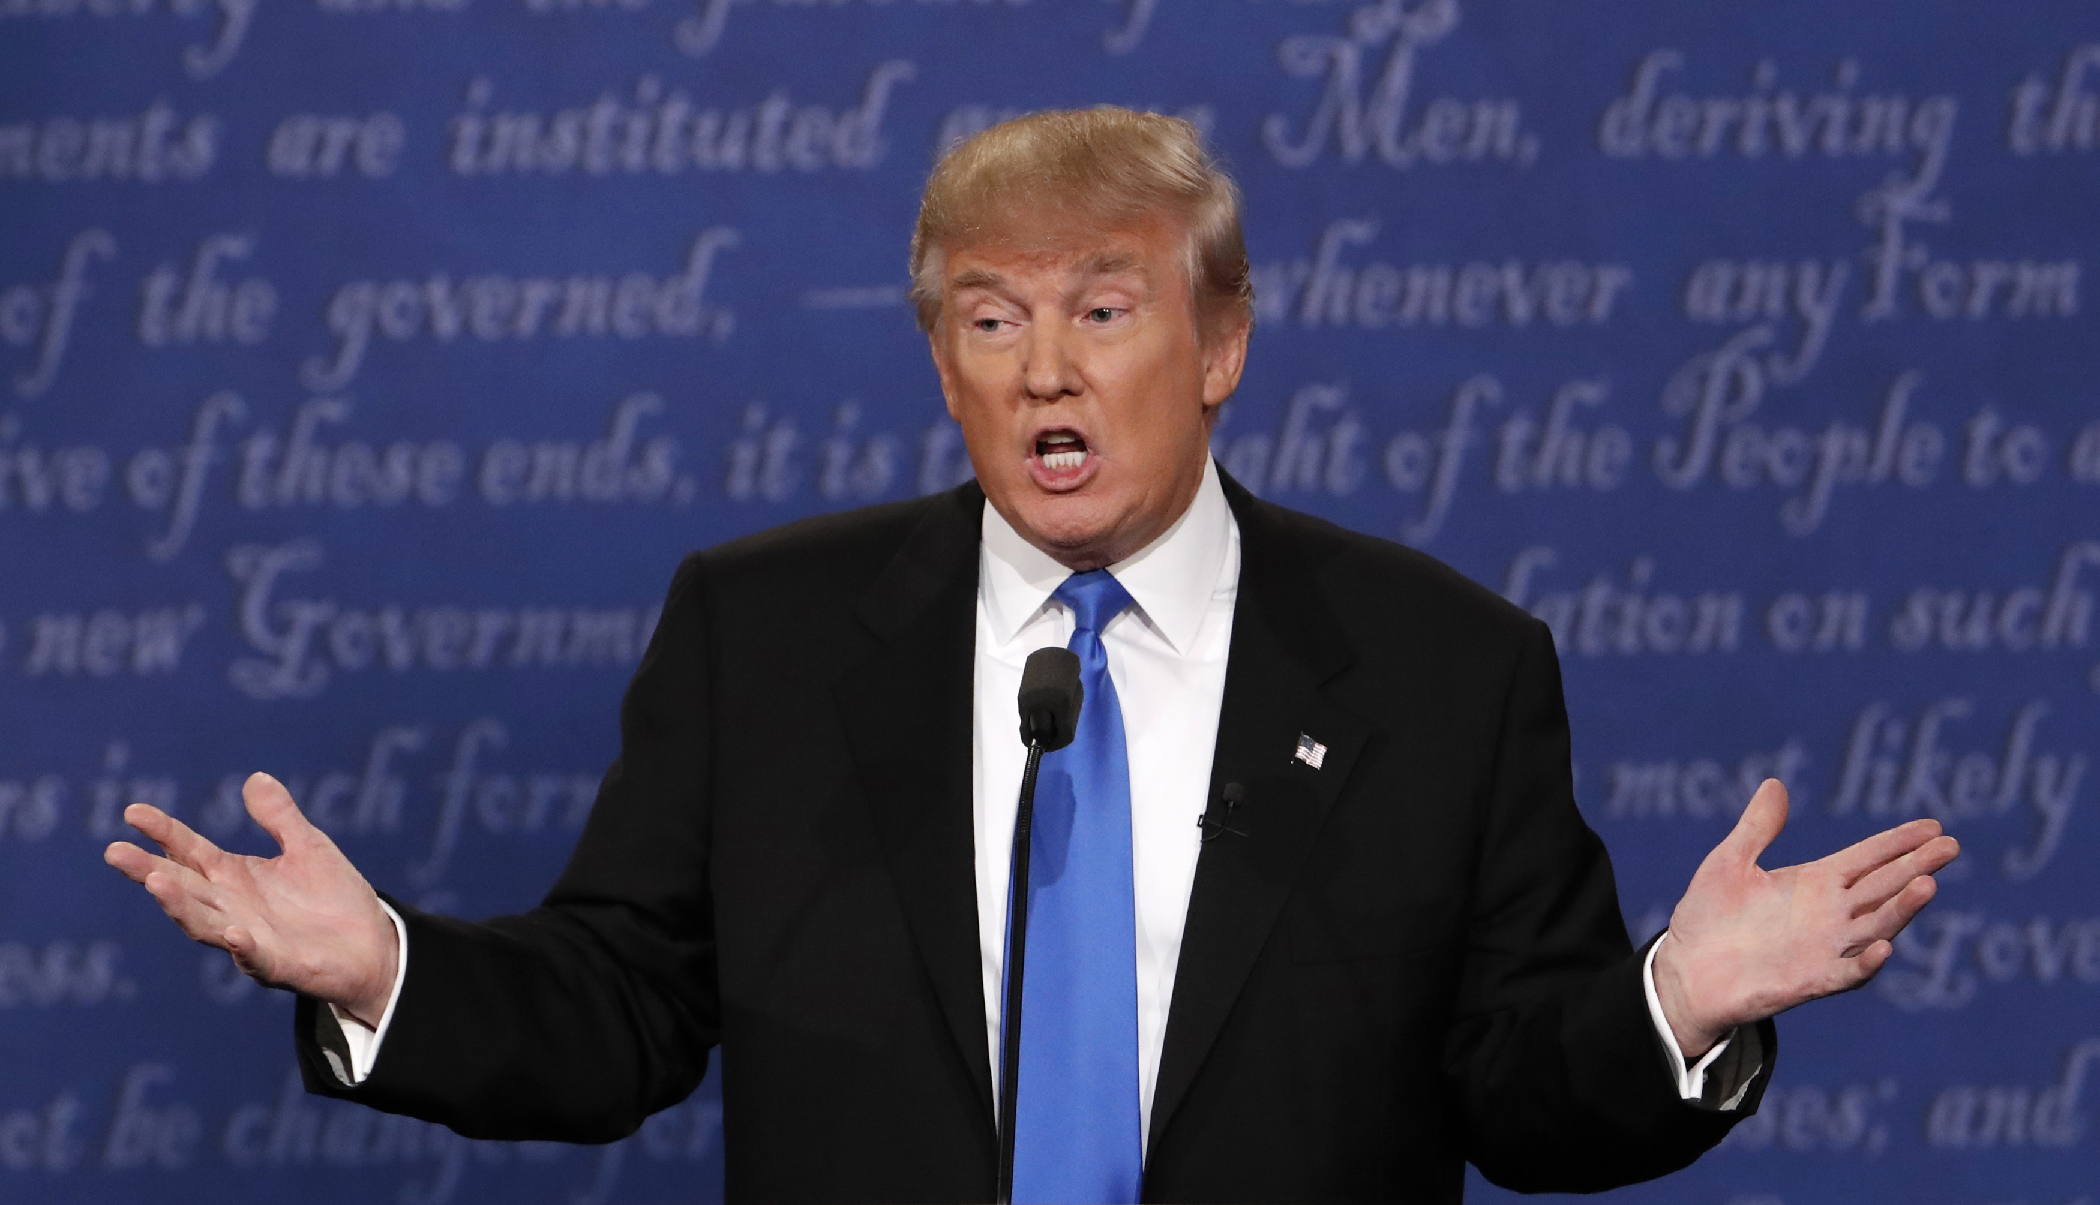 Economics Bloggers Fact-Checked the Presidential Debate